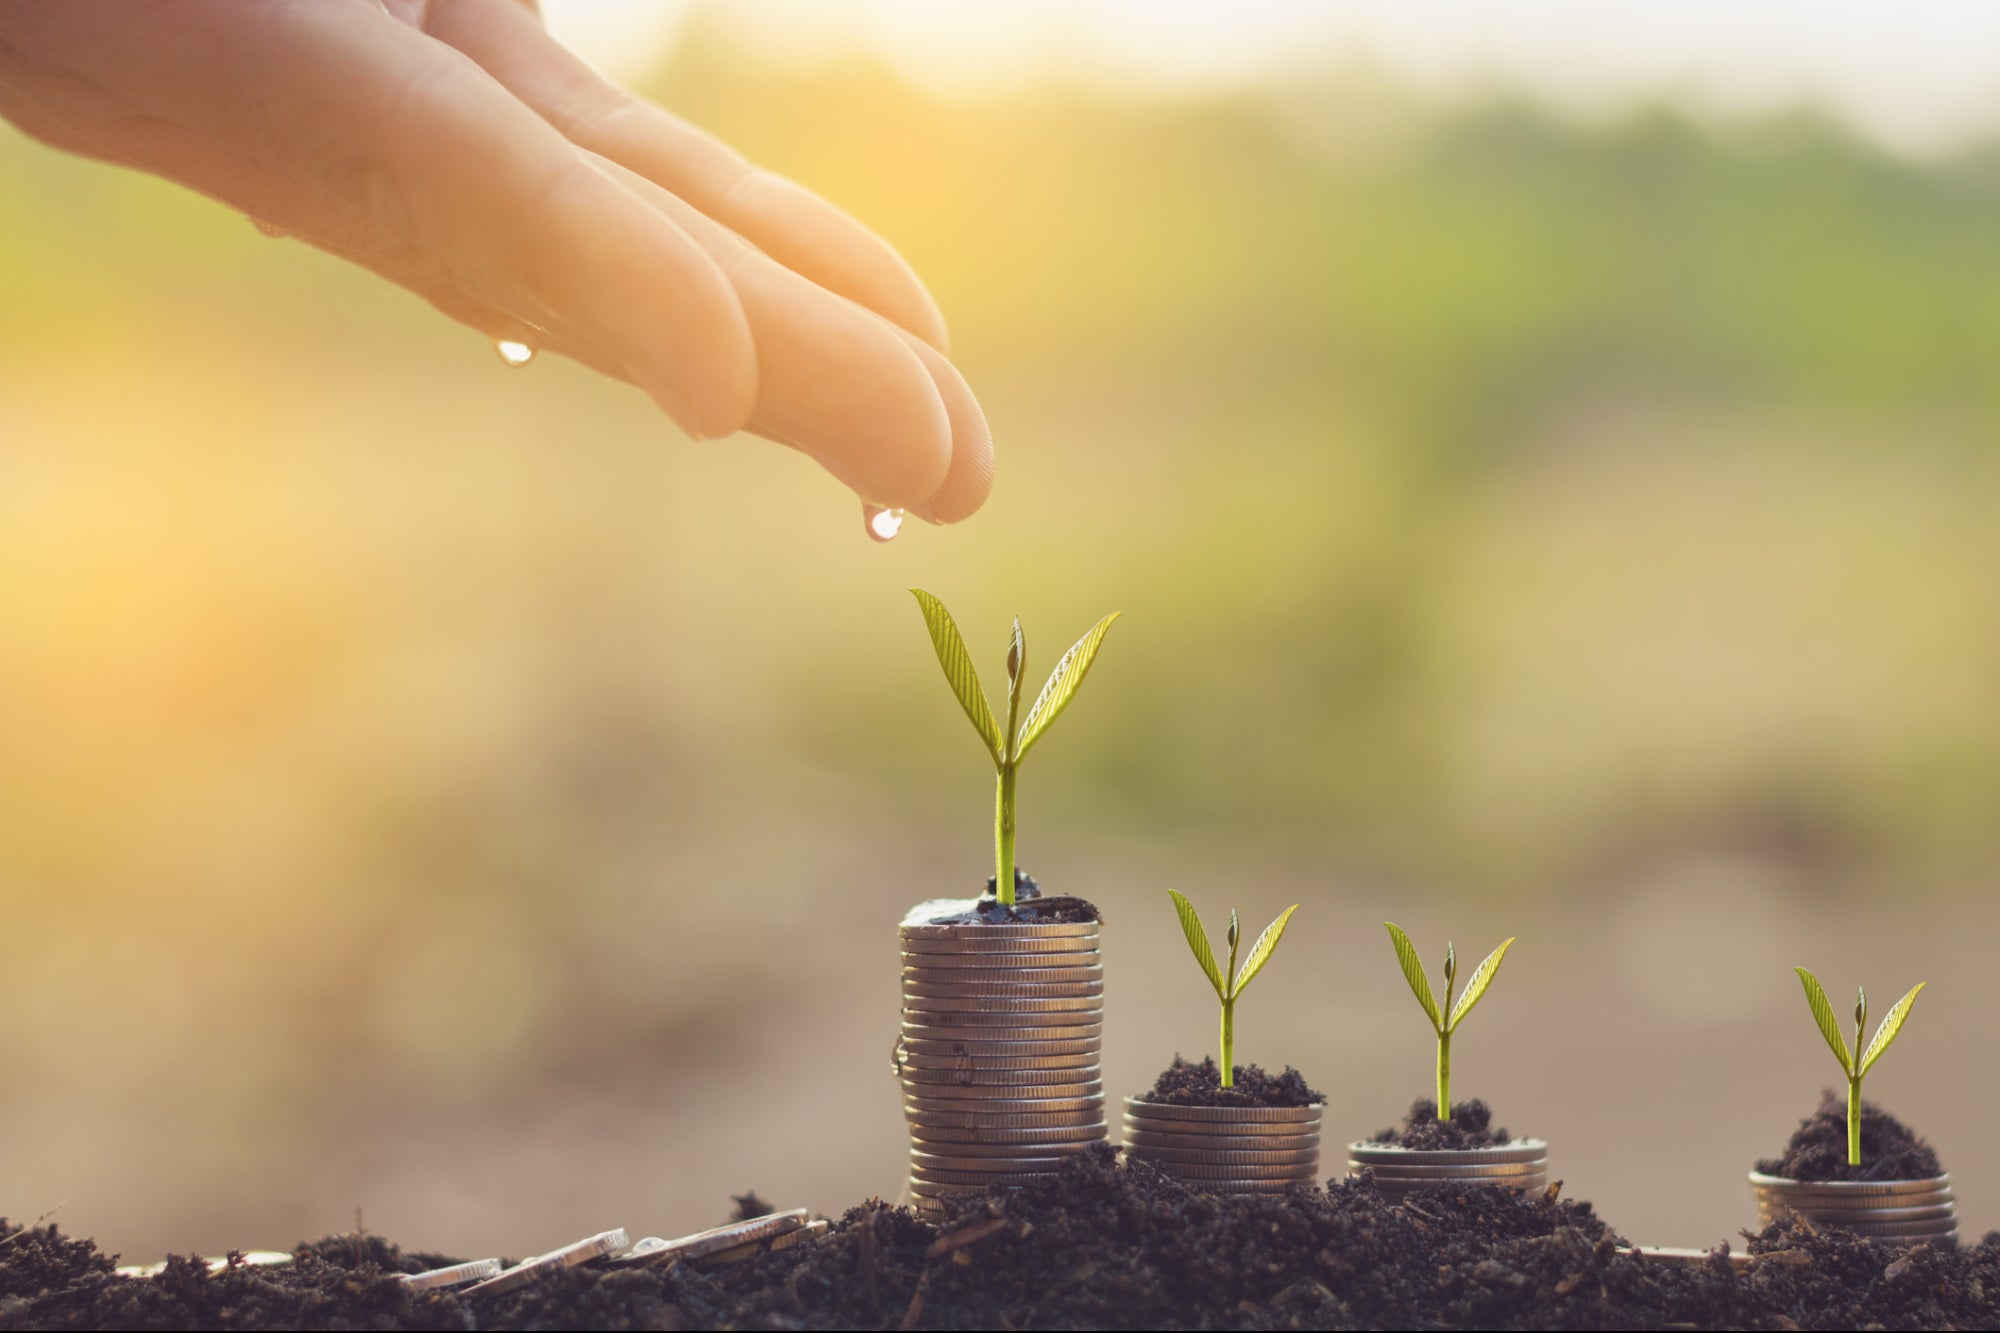 Seed, Sow, Water, Grow: 4 Expert Tips to Secure Angel Investment for Your New Business Venture